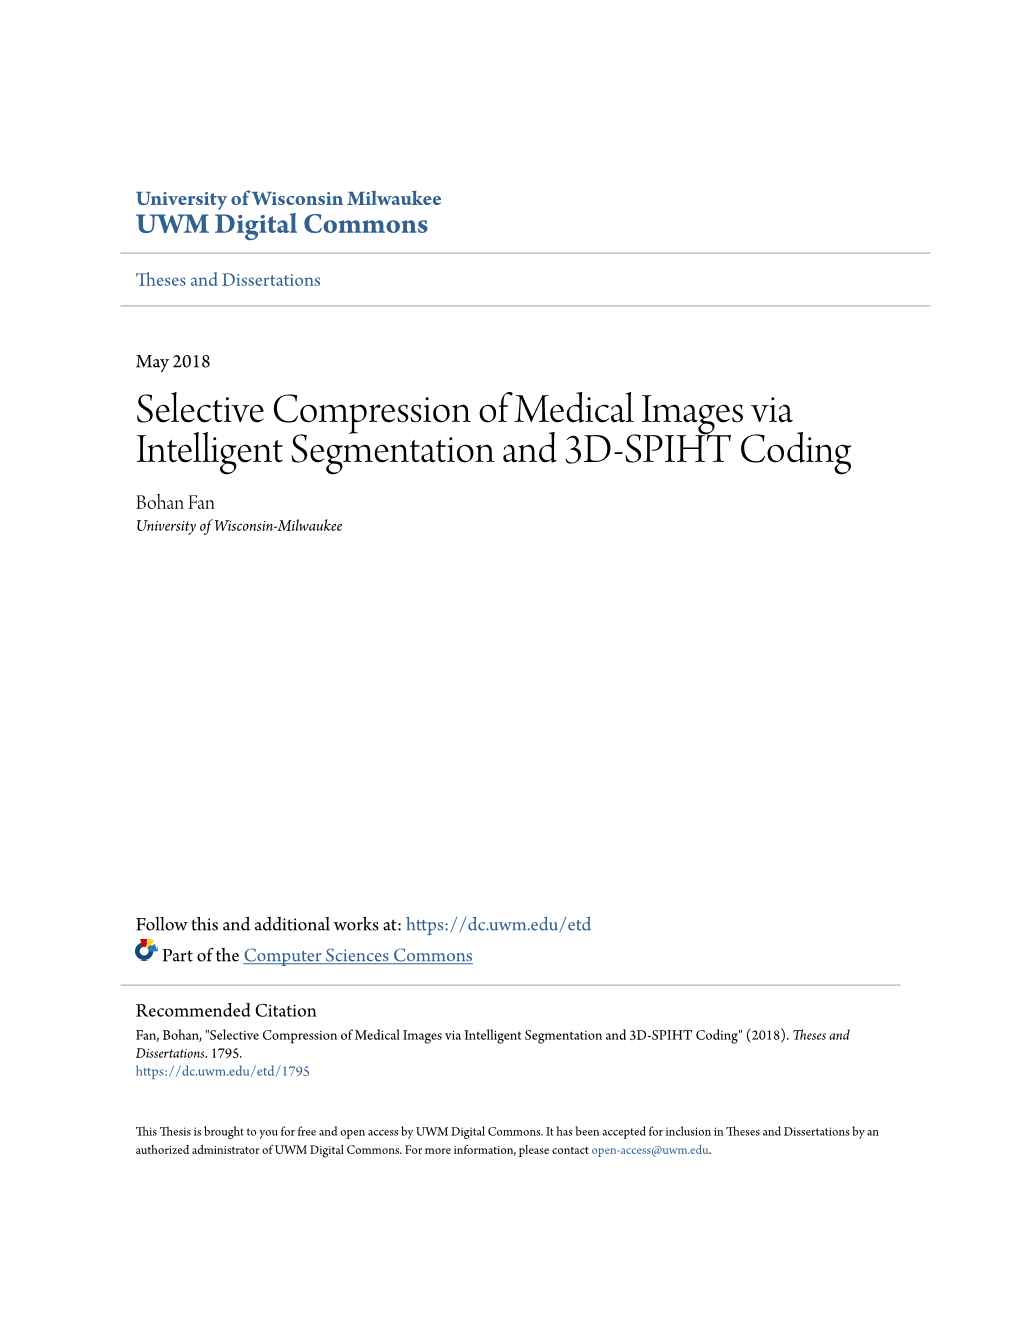 Selective Compression of Medical Images Via Intelligent Segmentation and 3D-SPIHT Coding Bohan Fan University of Wisconsin-Milwaukee